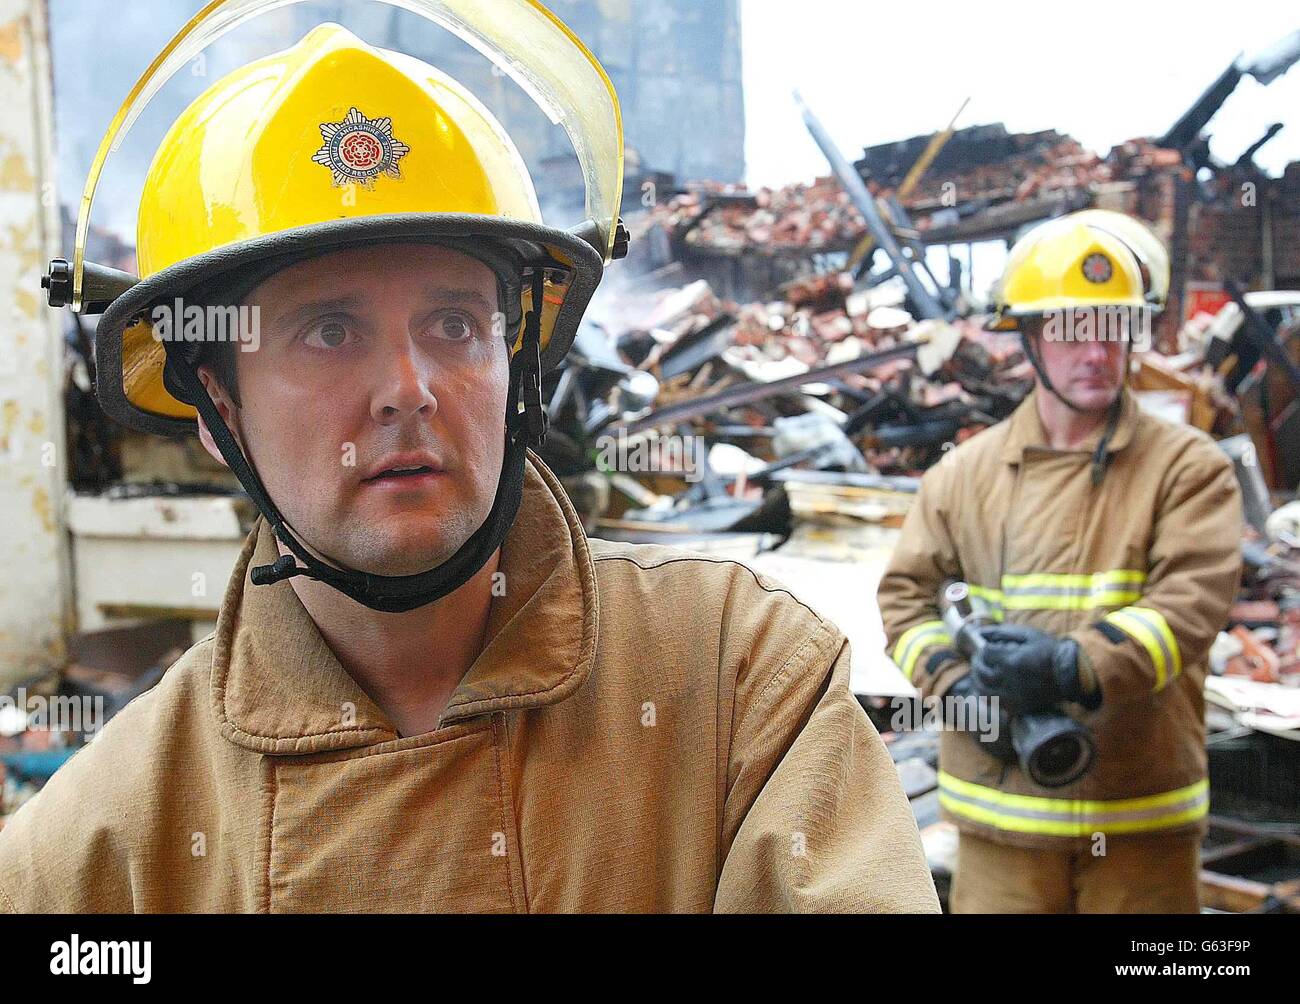 Firefighters Paul Webb (left) and Steve Rainford from Green Watch in Fleetwood damp down after a fire at an amusements arcade in Blackpool. * Thirty people were evacuated from their homes after firefighters forced their way into the the Grab City complex, which includes a Madame Tussaud's wax museum, on Blackpool's south promenade after the blaze was discovered in the early hours of this morning. It was not yet known if the cause of the fire was suspicious police said. Stock Photo